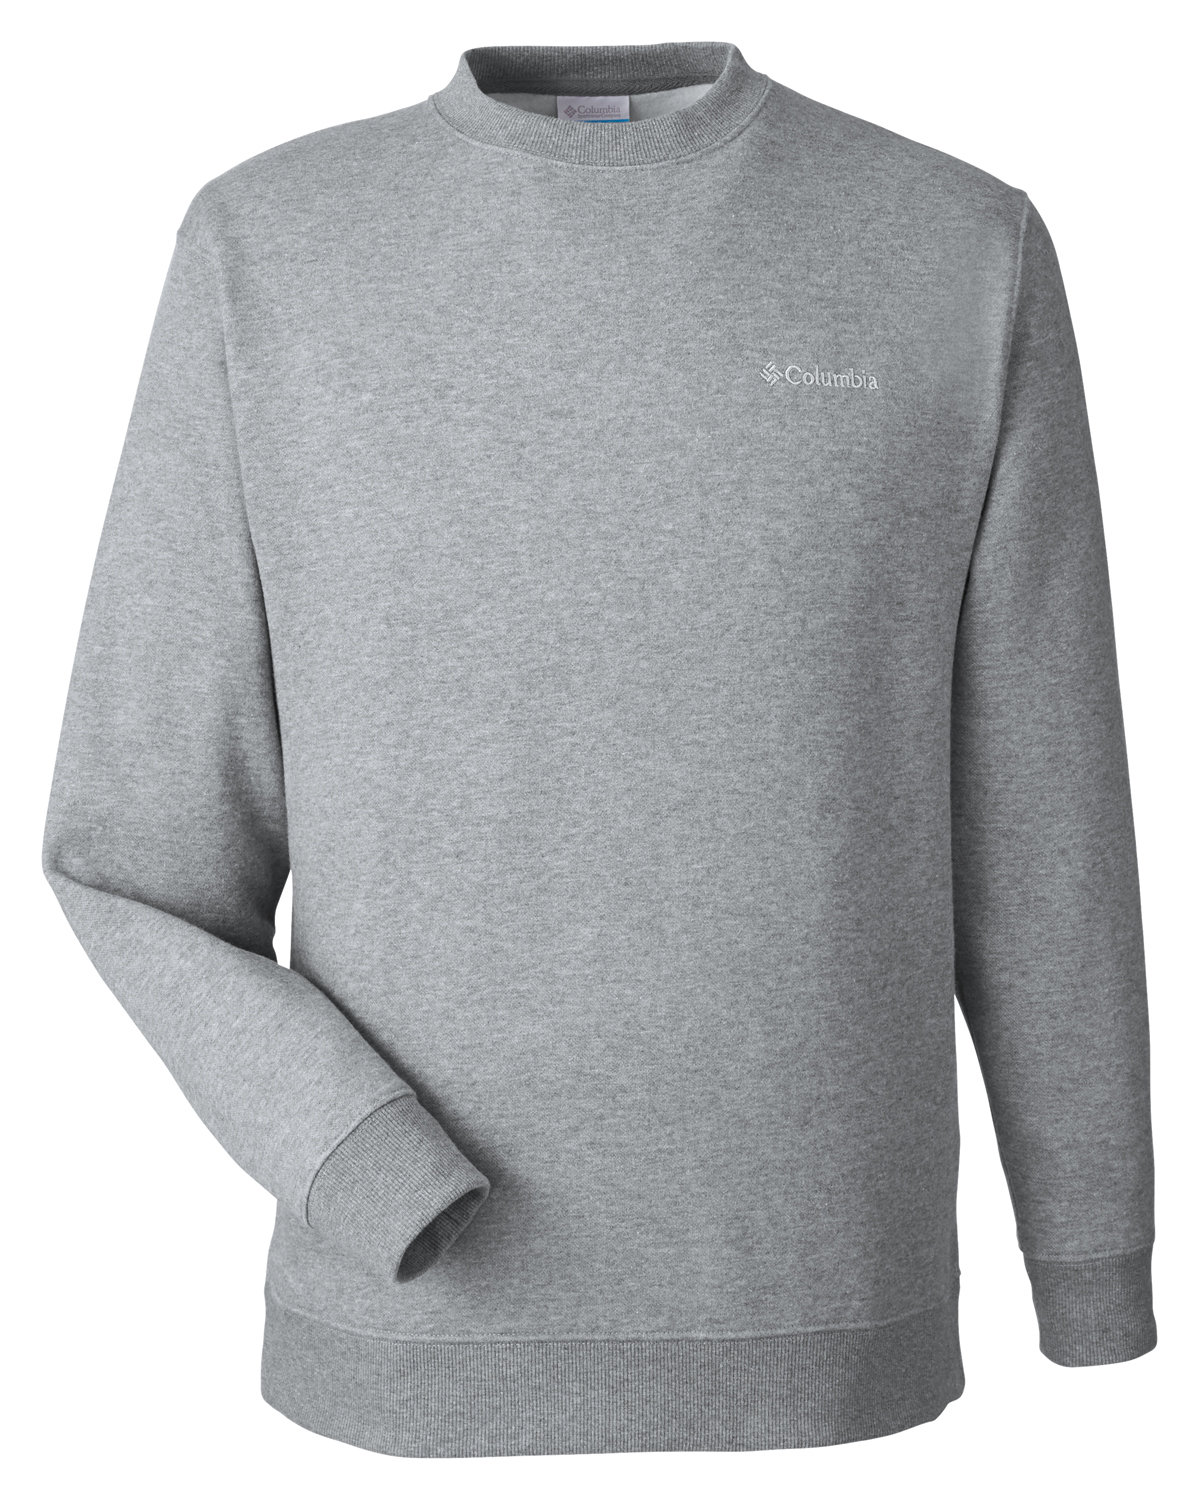 Picture of Columbia Men's Hart Mountain Sweater